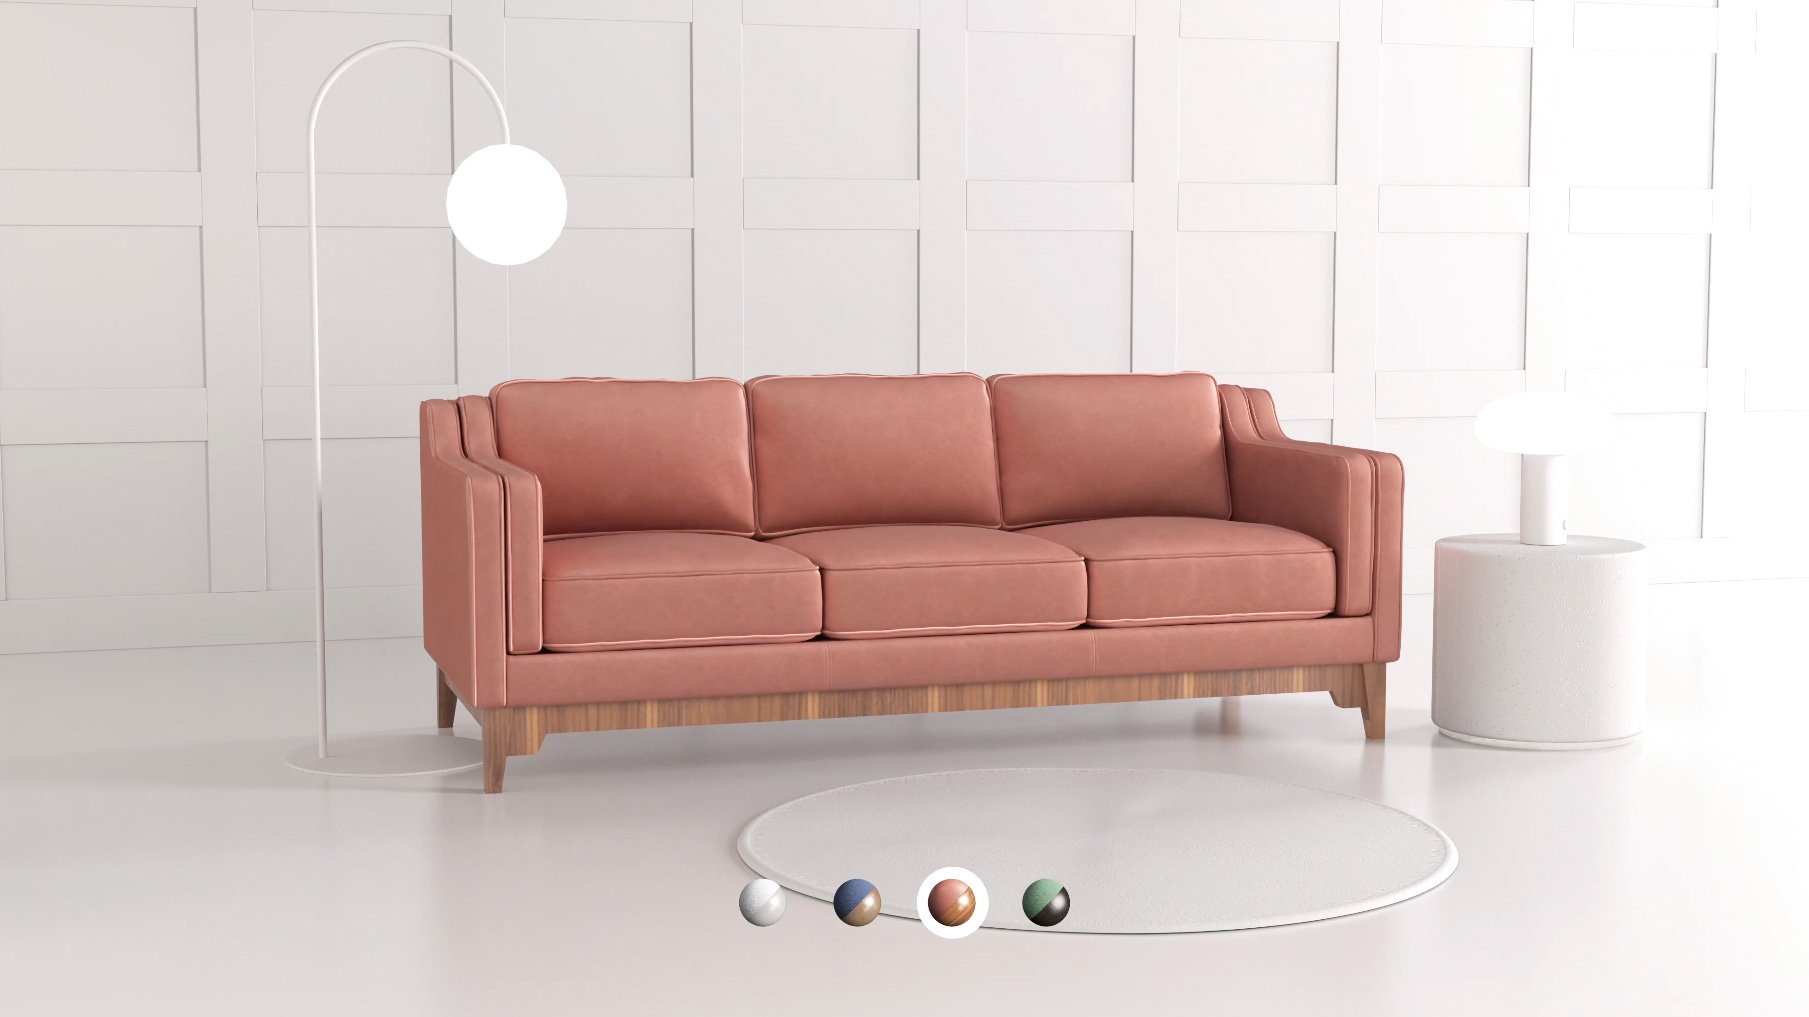 sofa being customized in a product customizer